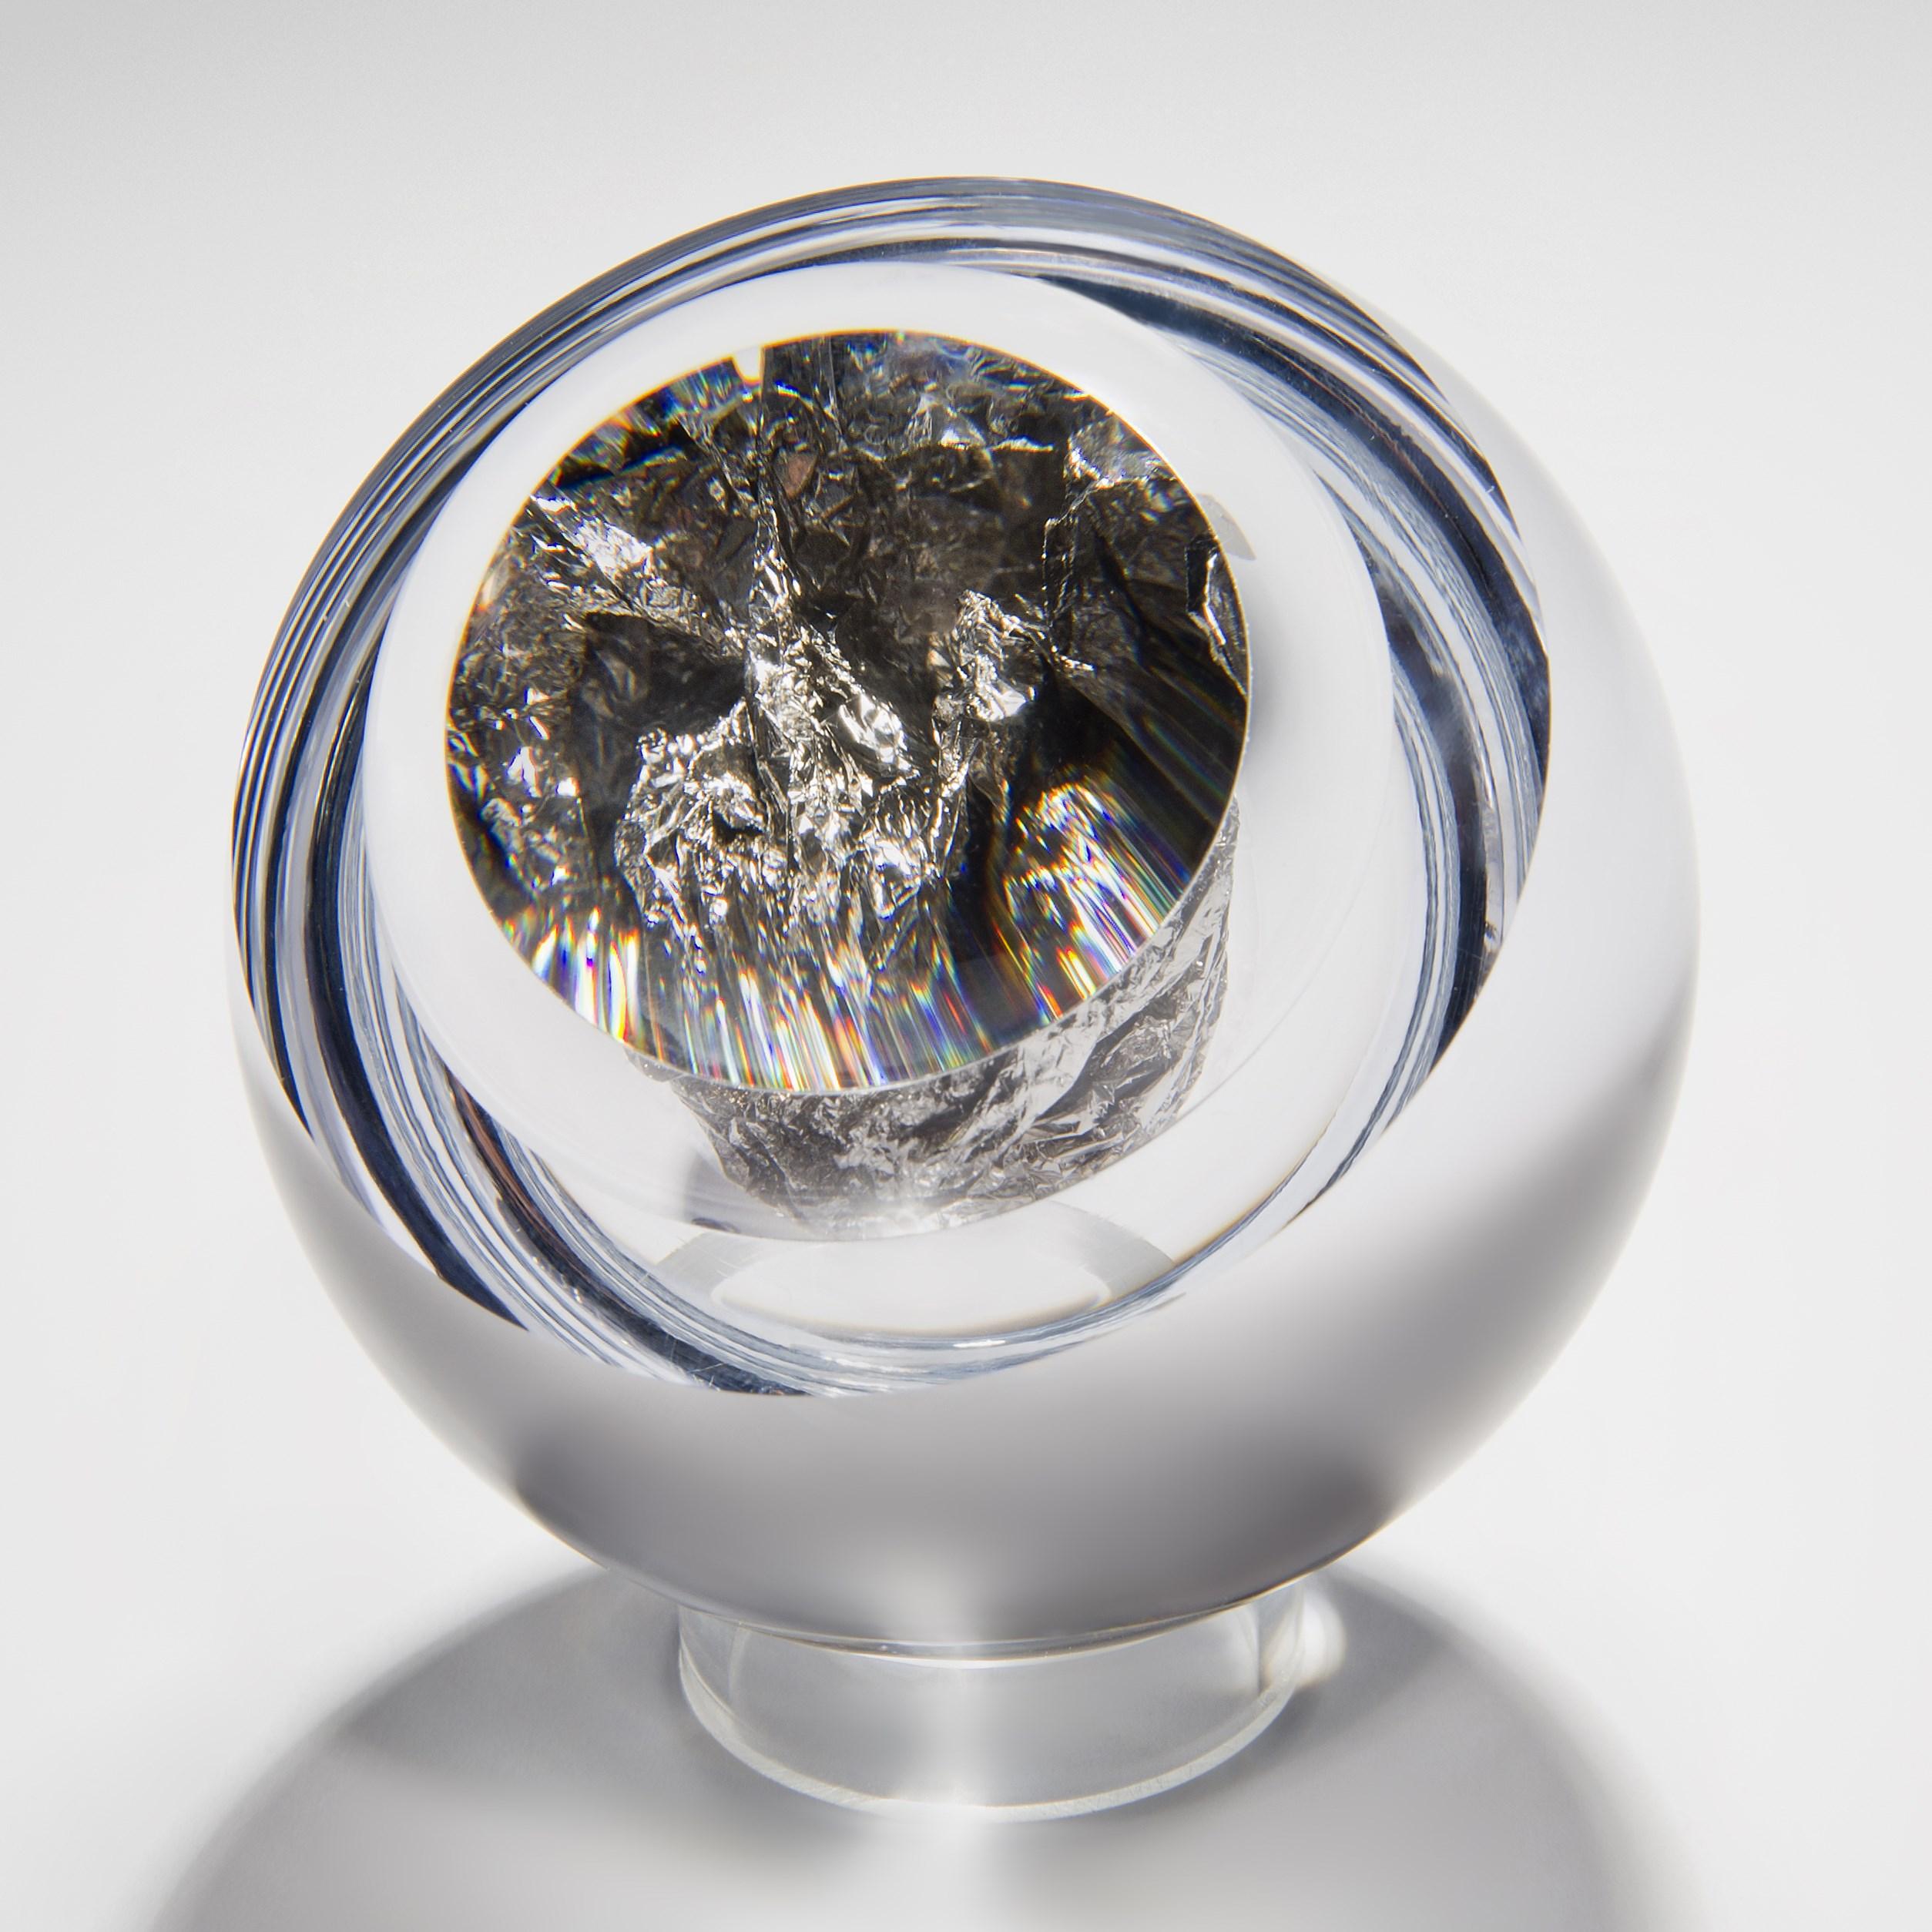 'Auri No 30 with Platinum' is a handblown and cut glass sculpture with platinum leaf, created by the British artist, Anthony Scala.

The Auri Collection is available in 8 different sizes from approx 4cm to 20cm ø, with around 22 choices of silver